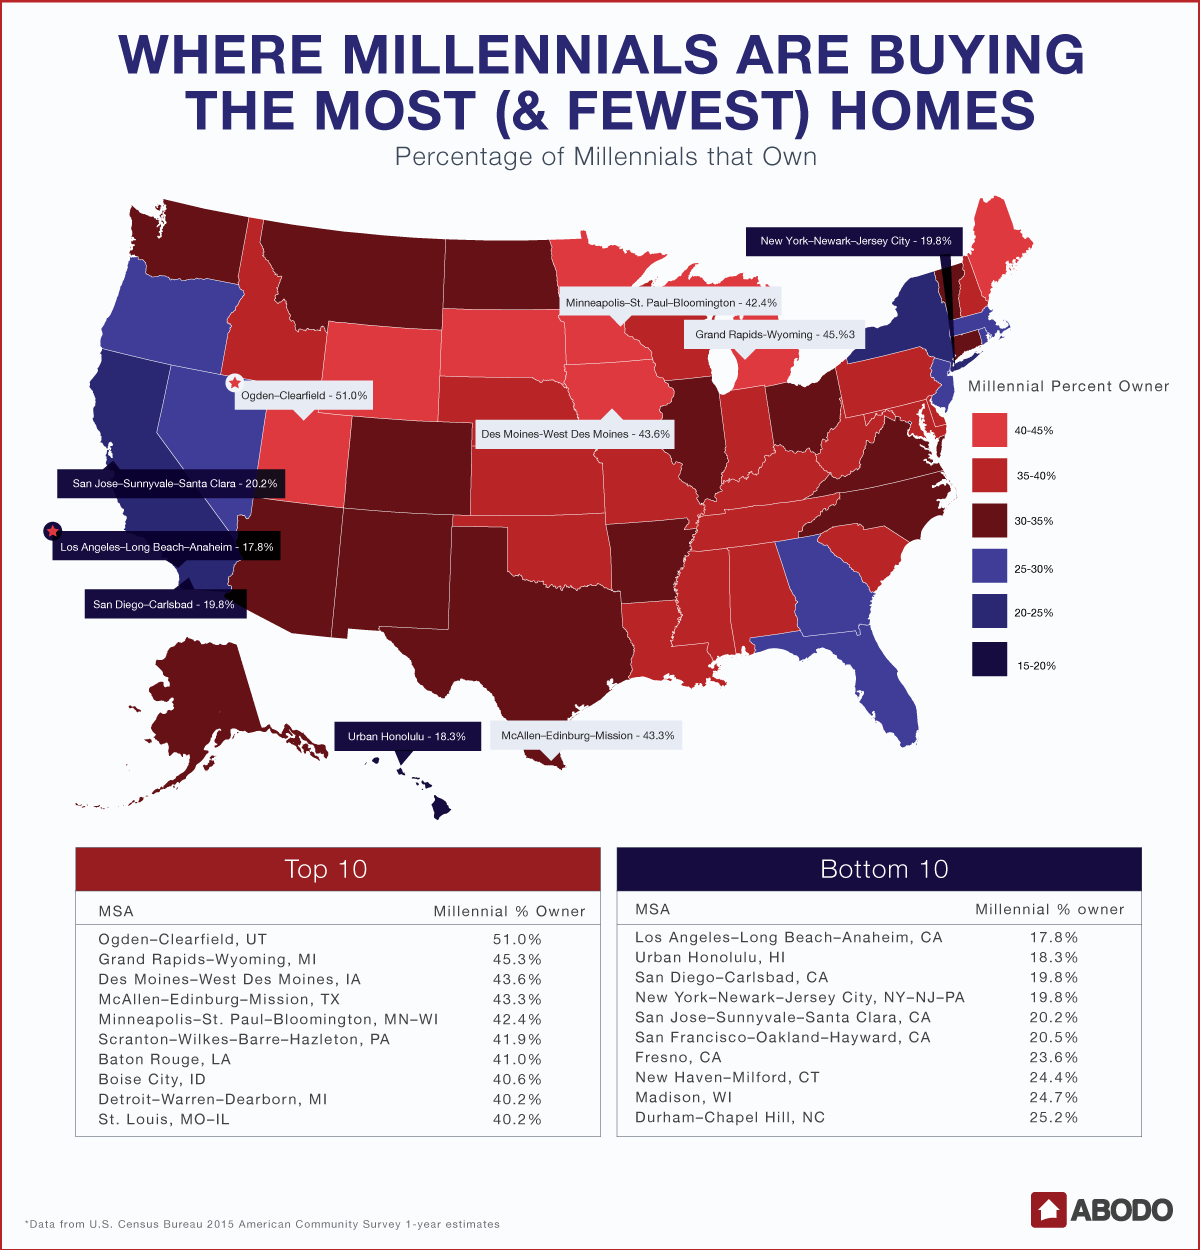 Where millennials are buying the most and fewest homes